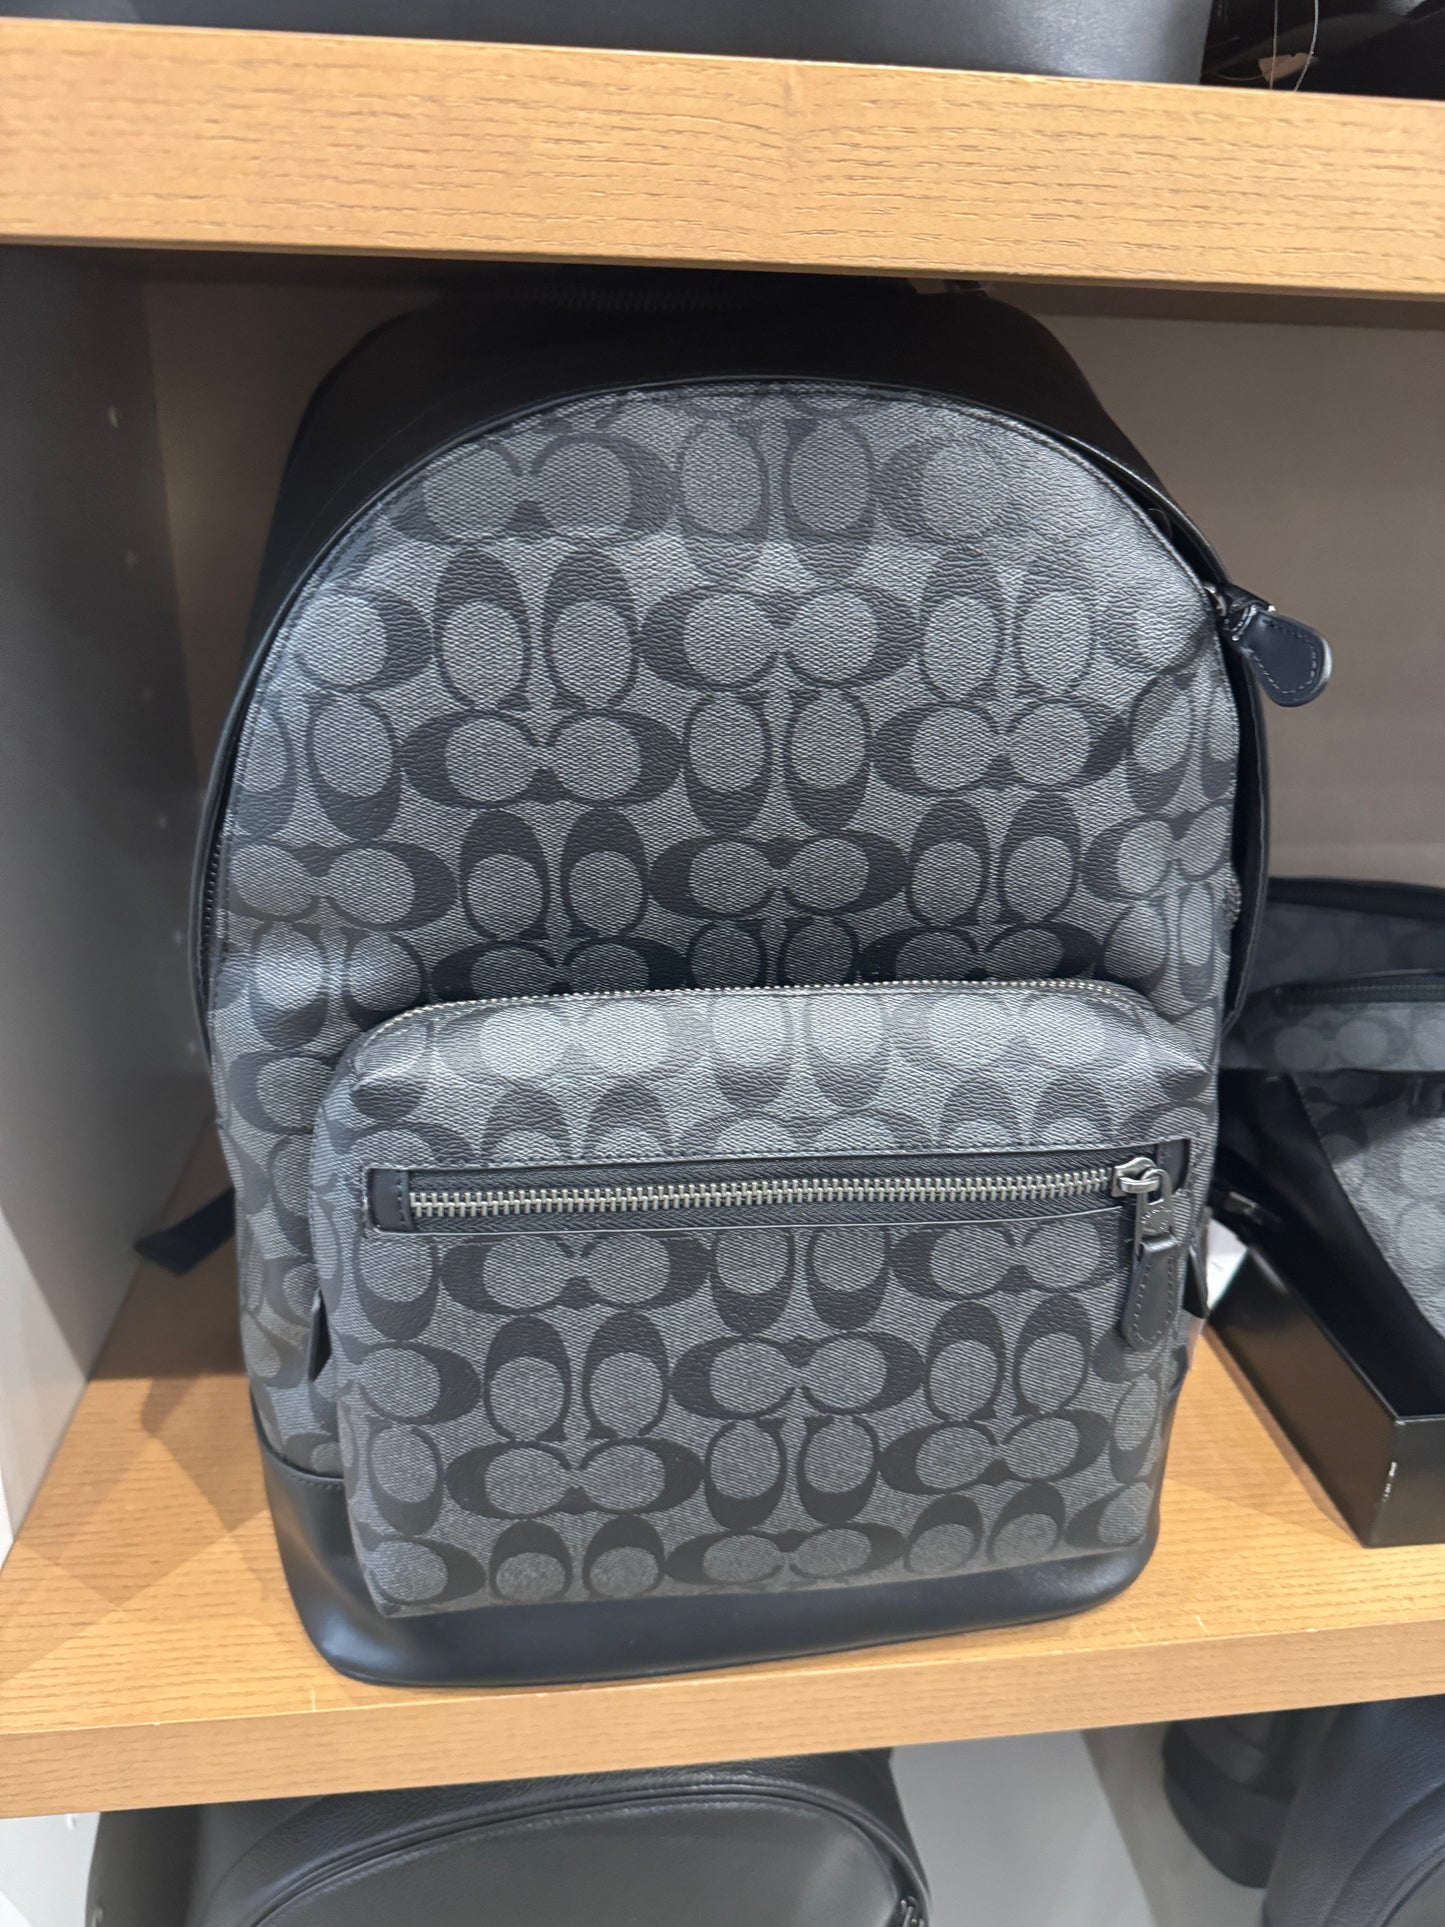 Coach West Men Backpack In Signature Charcoal Black (Pre-Order)